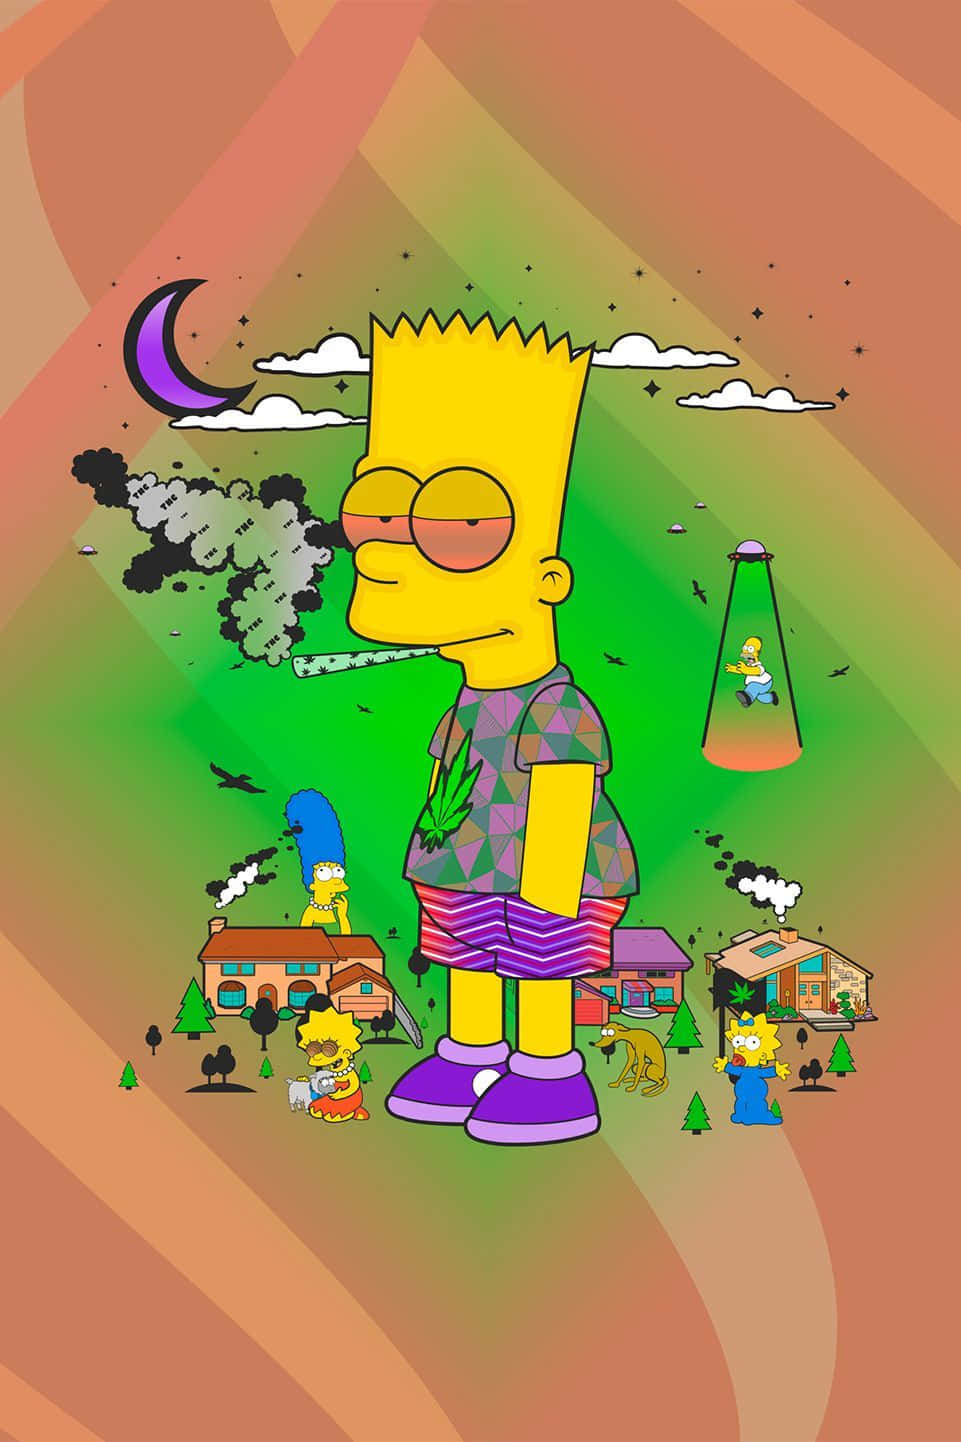 "Smoking up with a classic - Bart Simpson enjoying a joint" Wallpaper